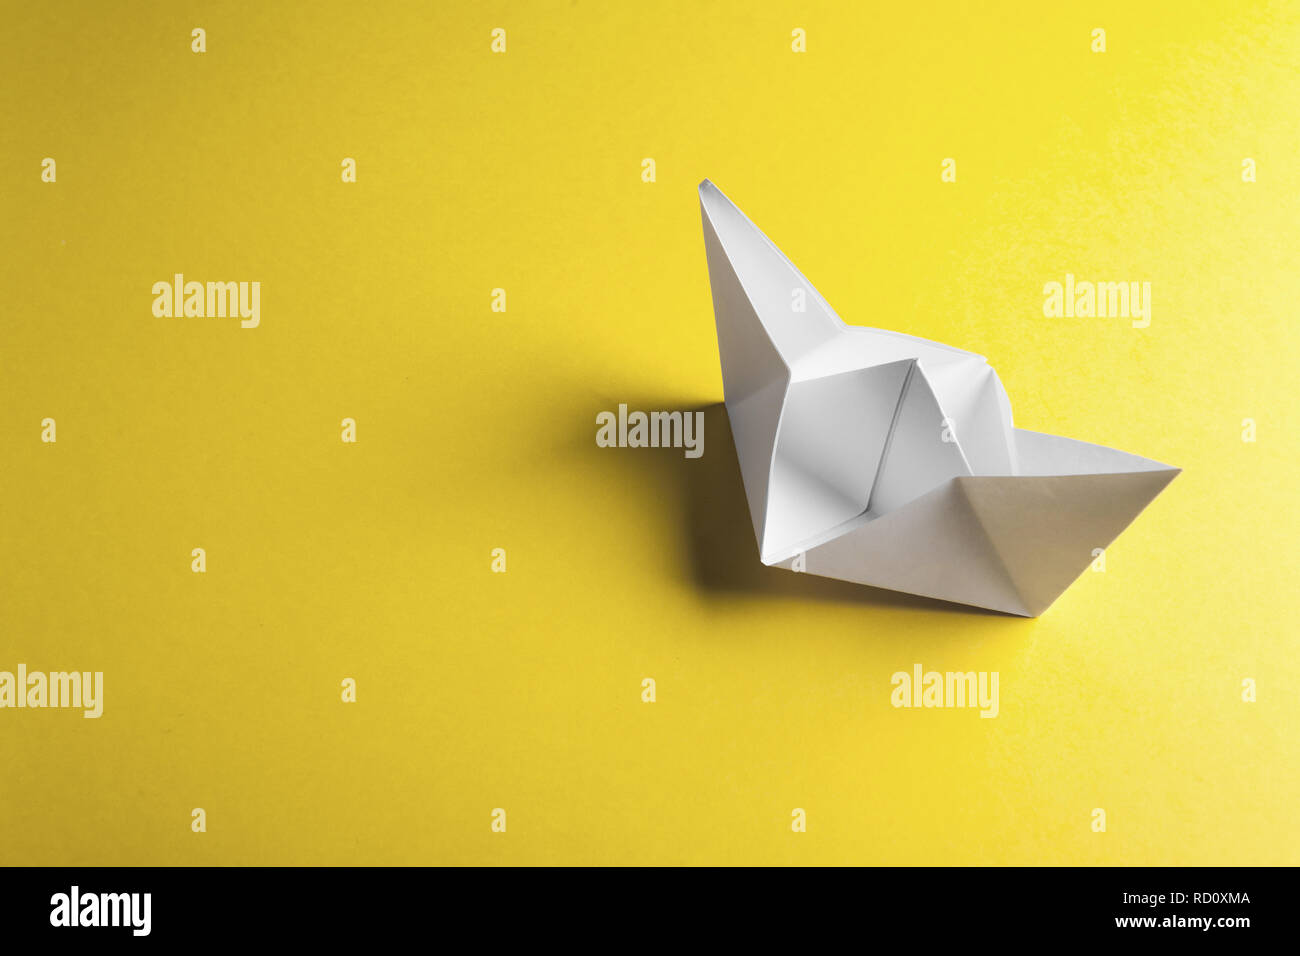 Paper boat on a yellow background with copyspace Stock Photo